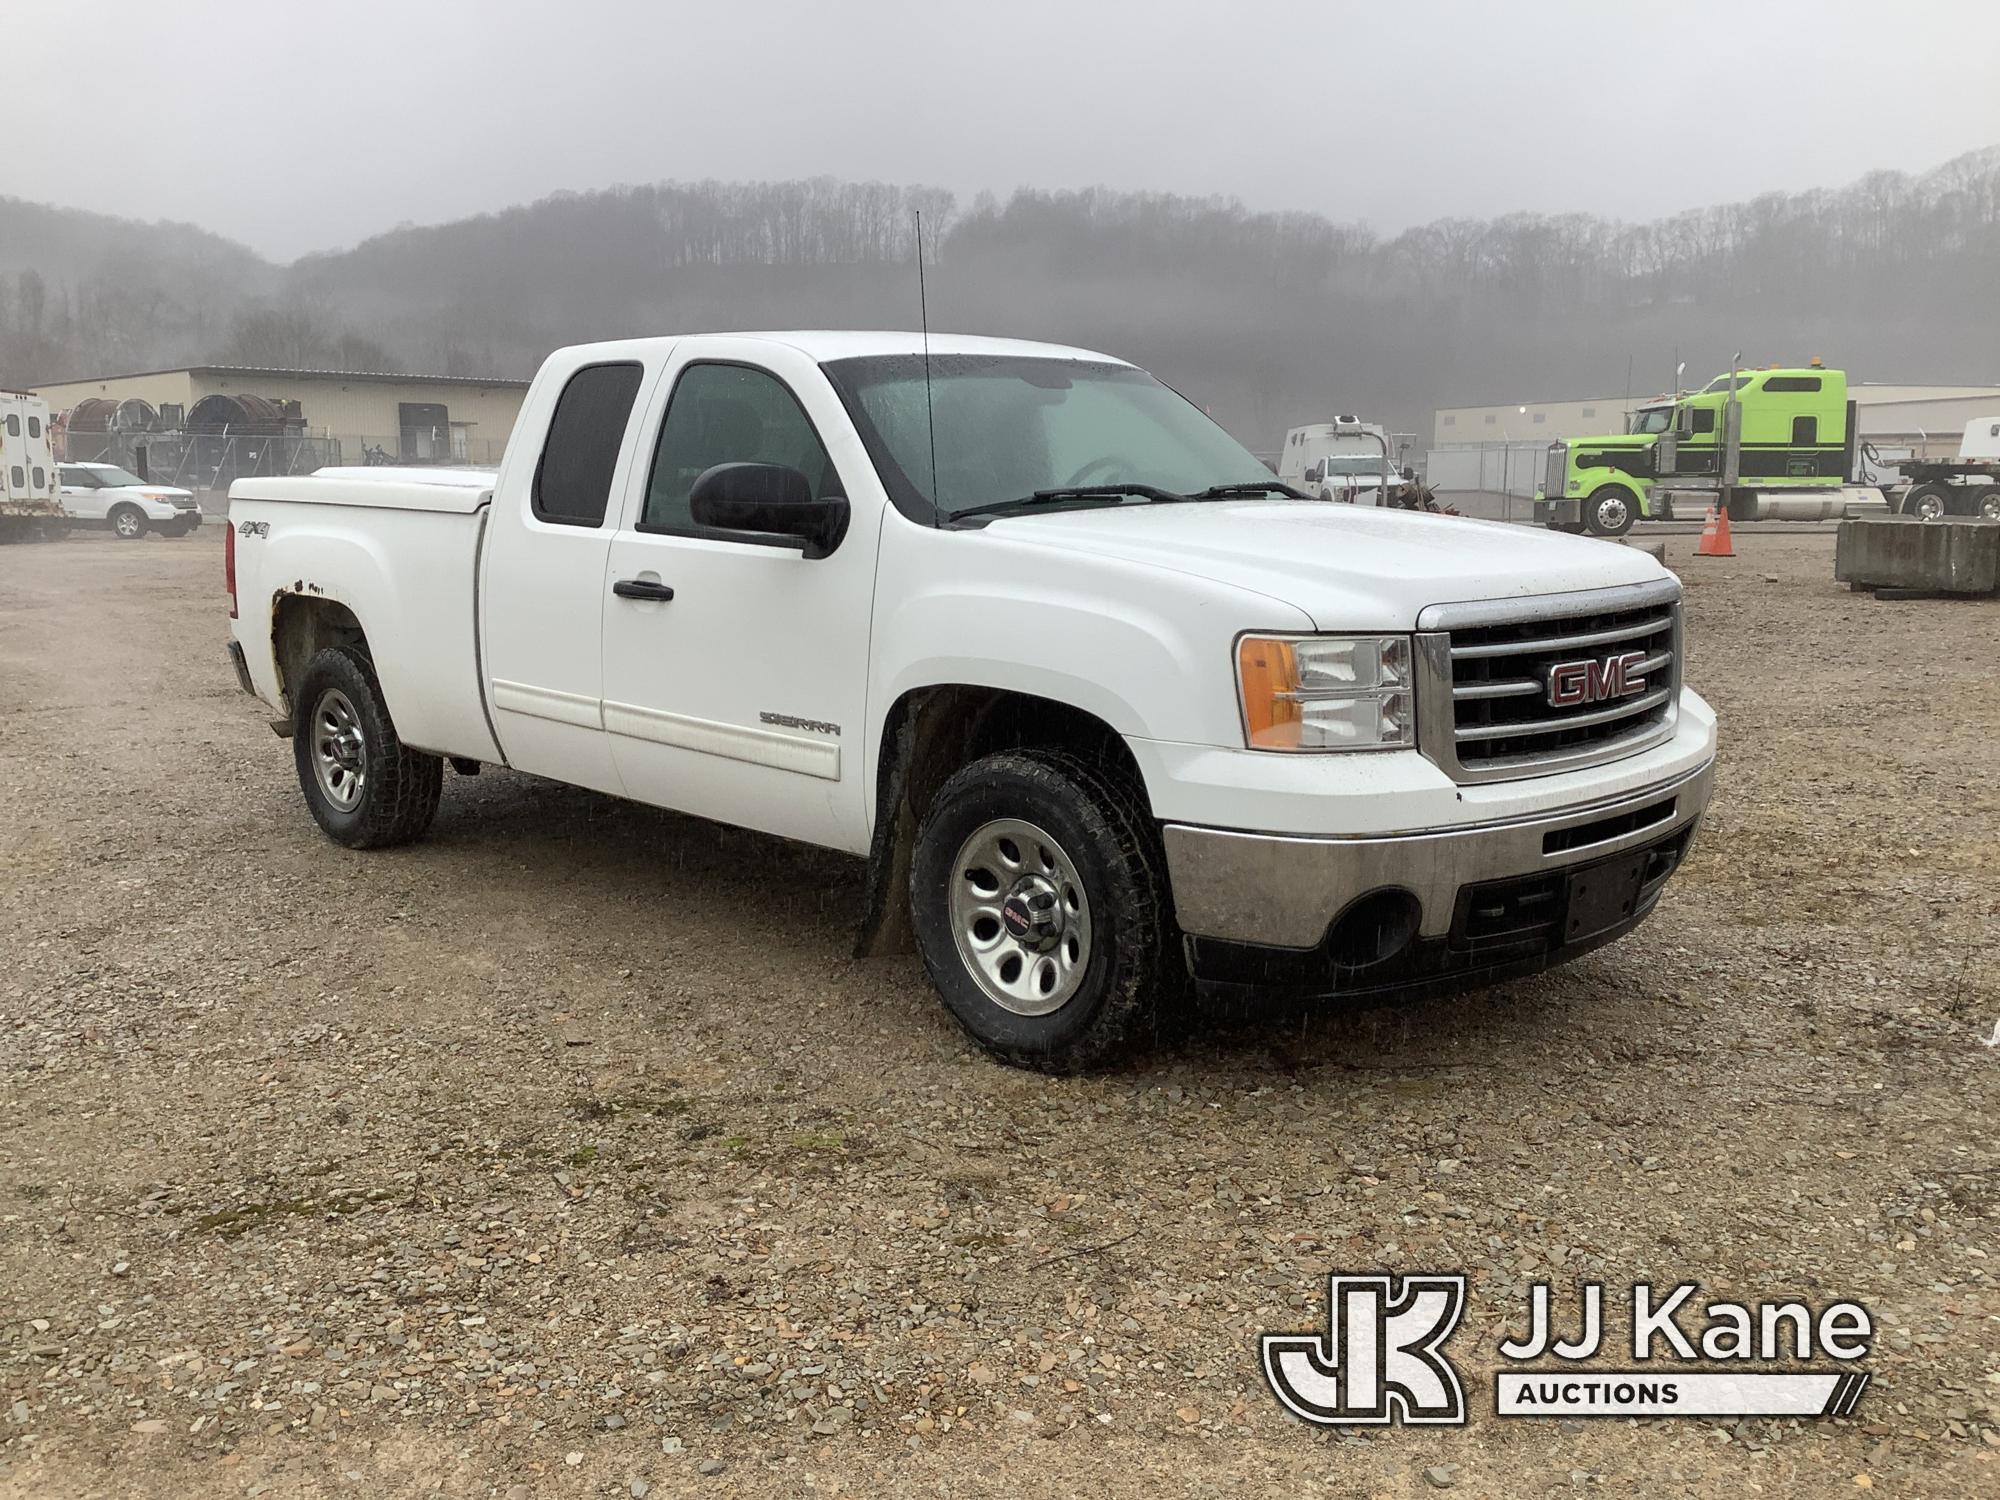 (Smock, PA) 2012 GMC Sierra 1500 4x4 Extended-Cab Pickup Truck Title Delay) (Runs & Moves, Rust, Pai